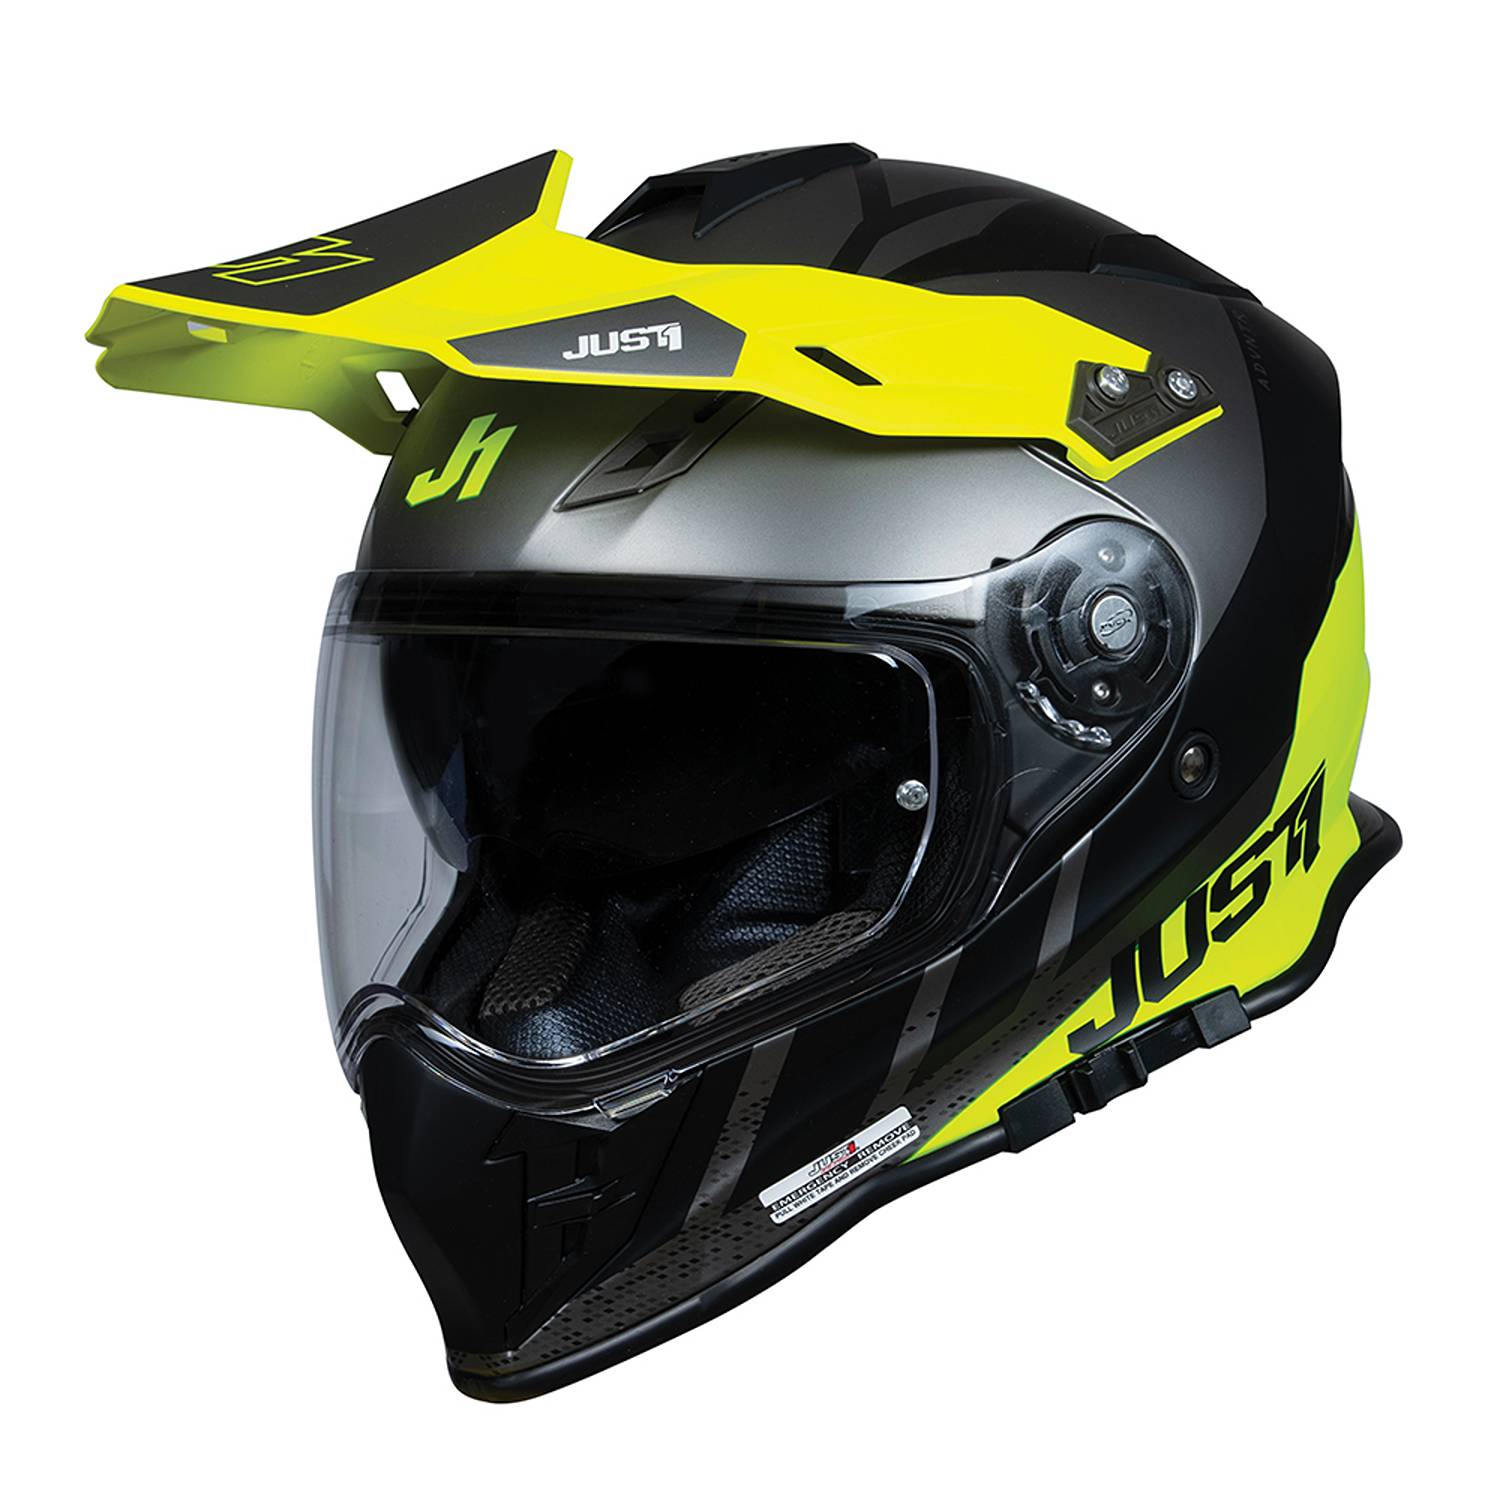 Image of Just1 J34 Pro Outerspace Jaune Vert Titane Aventure Casques Taille XL